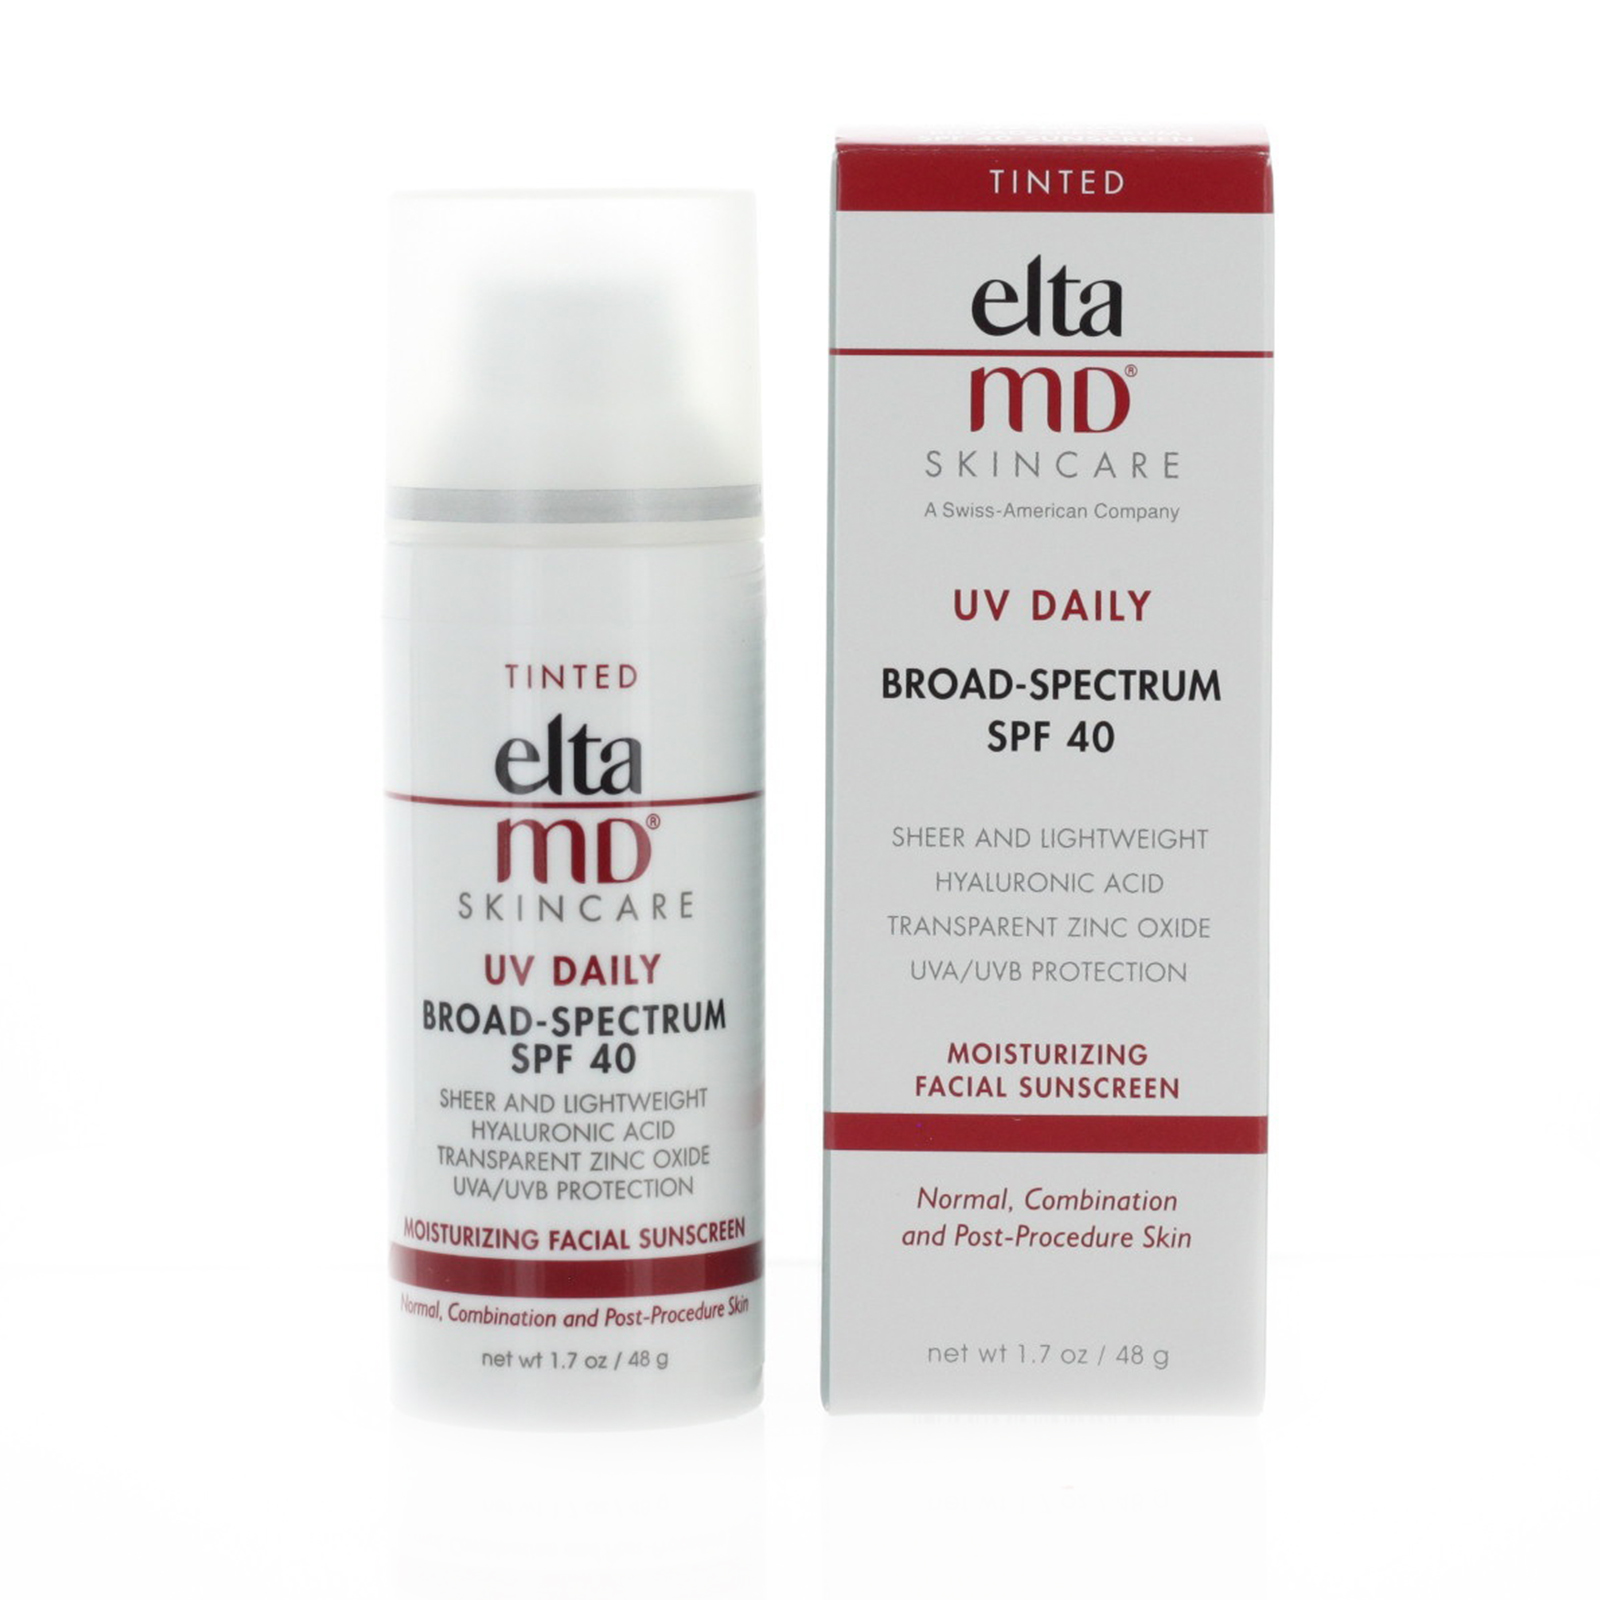 elta md tinted sunscreen show less